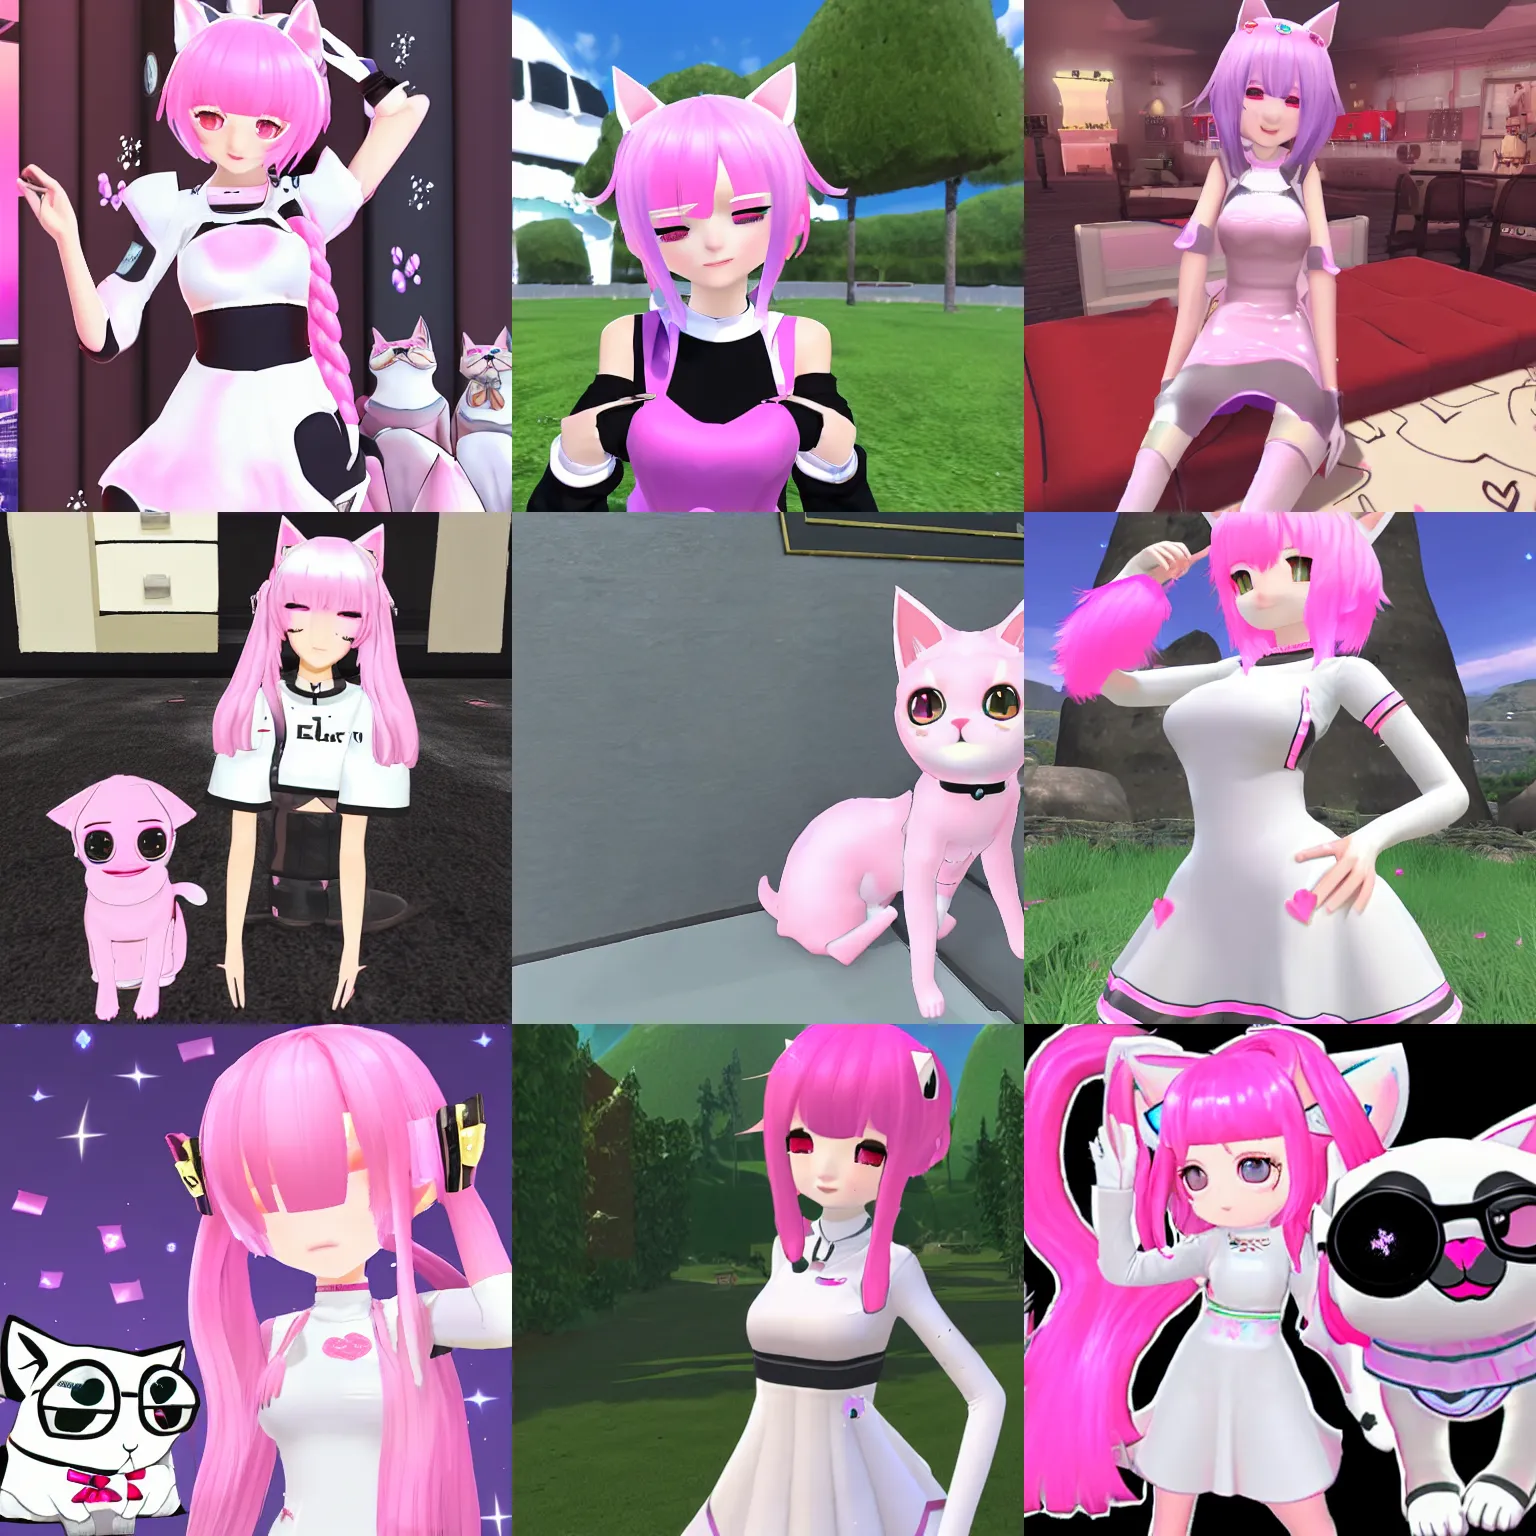 Prompt: VRChat e-girl, white elite dress, pink hair, red cat ears, winking, in the Great Pug